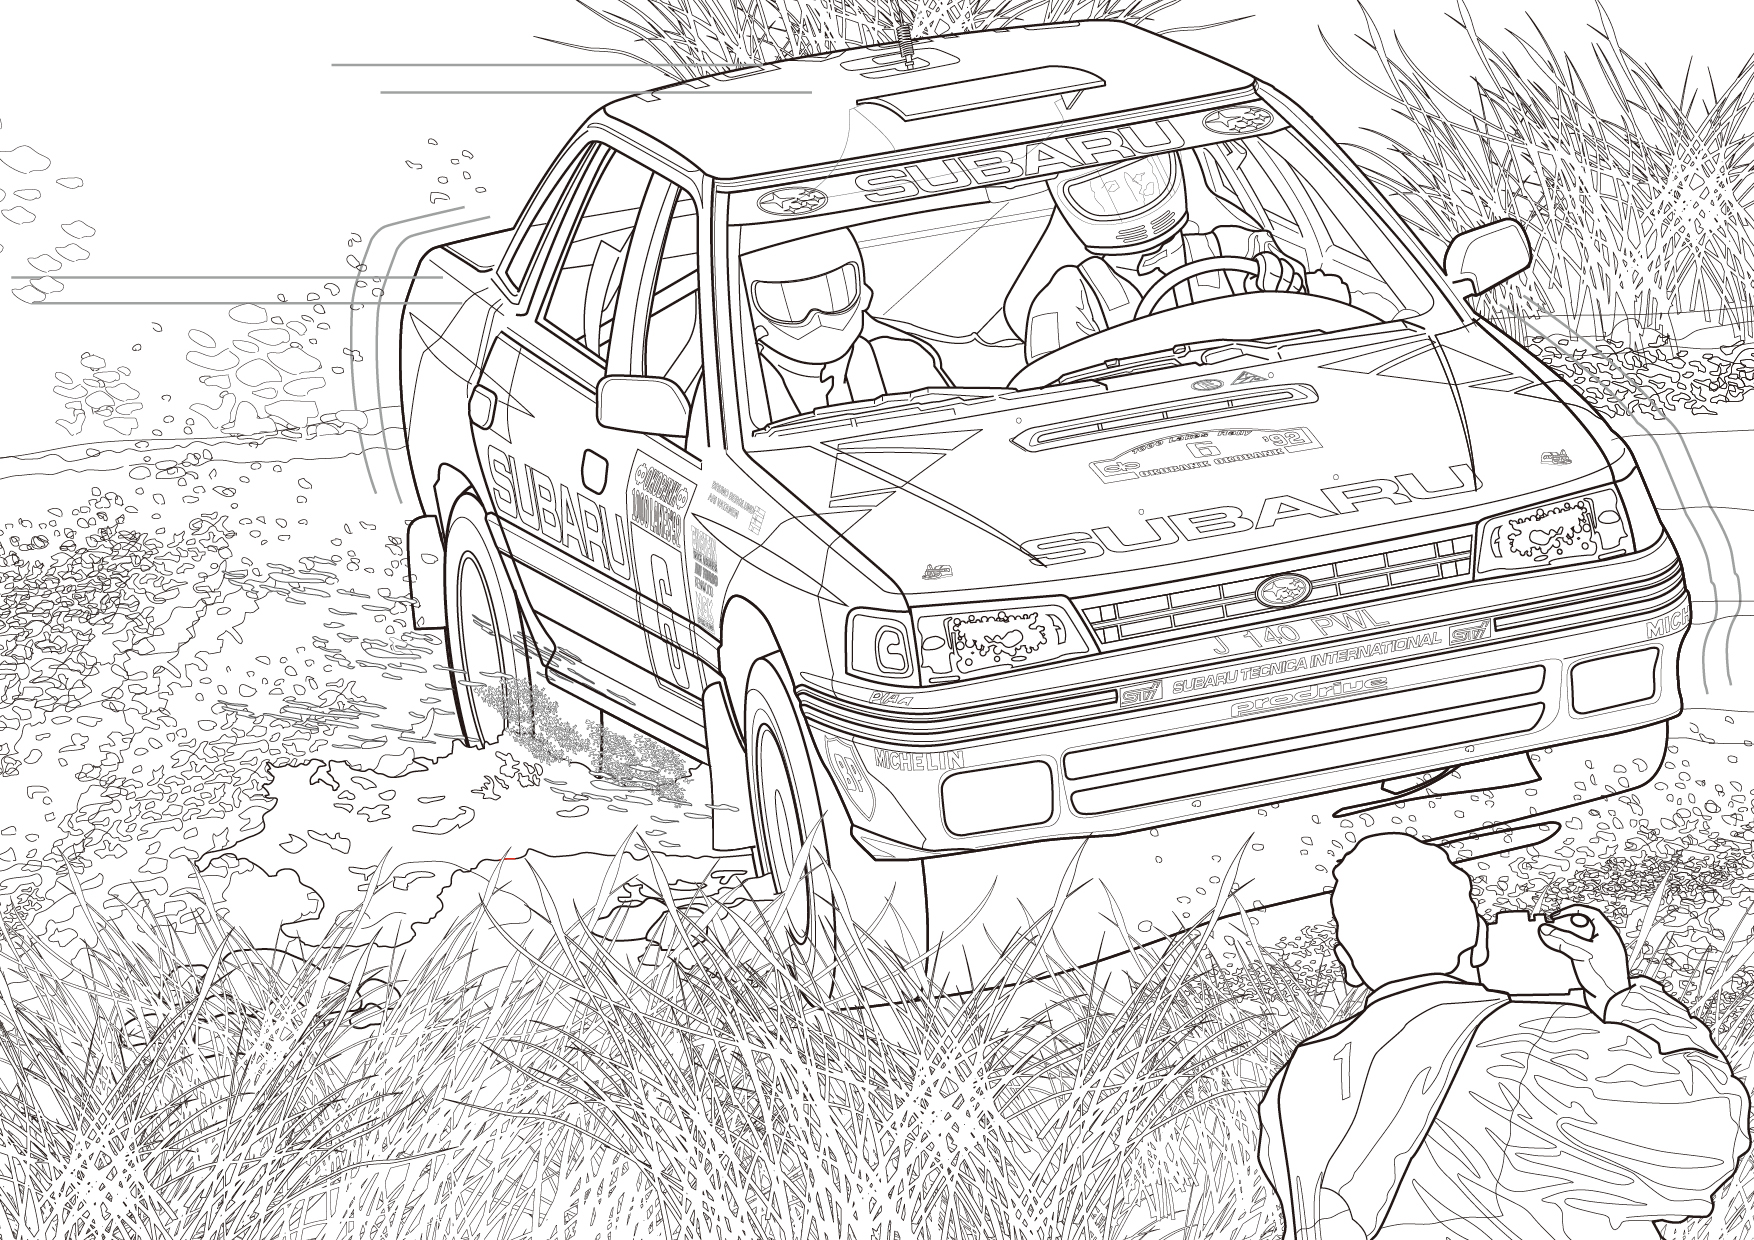 Subarus online museum offers odd concept cars coloring sheets and papercraft japanese nostalgic car